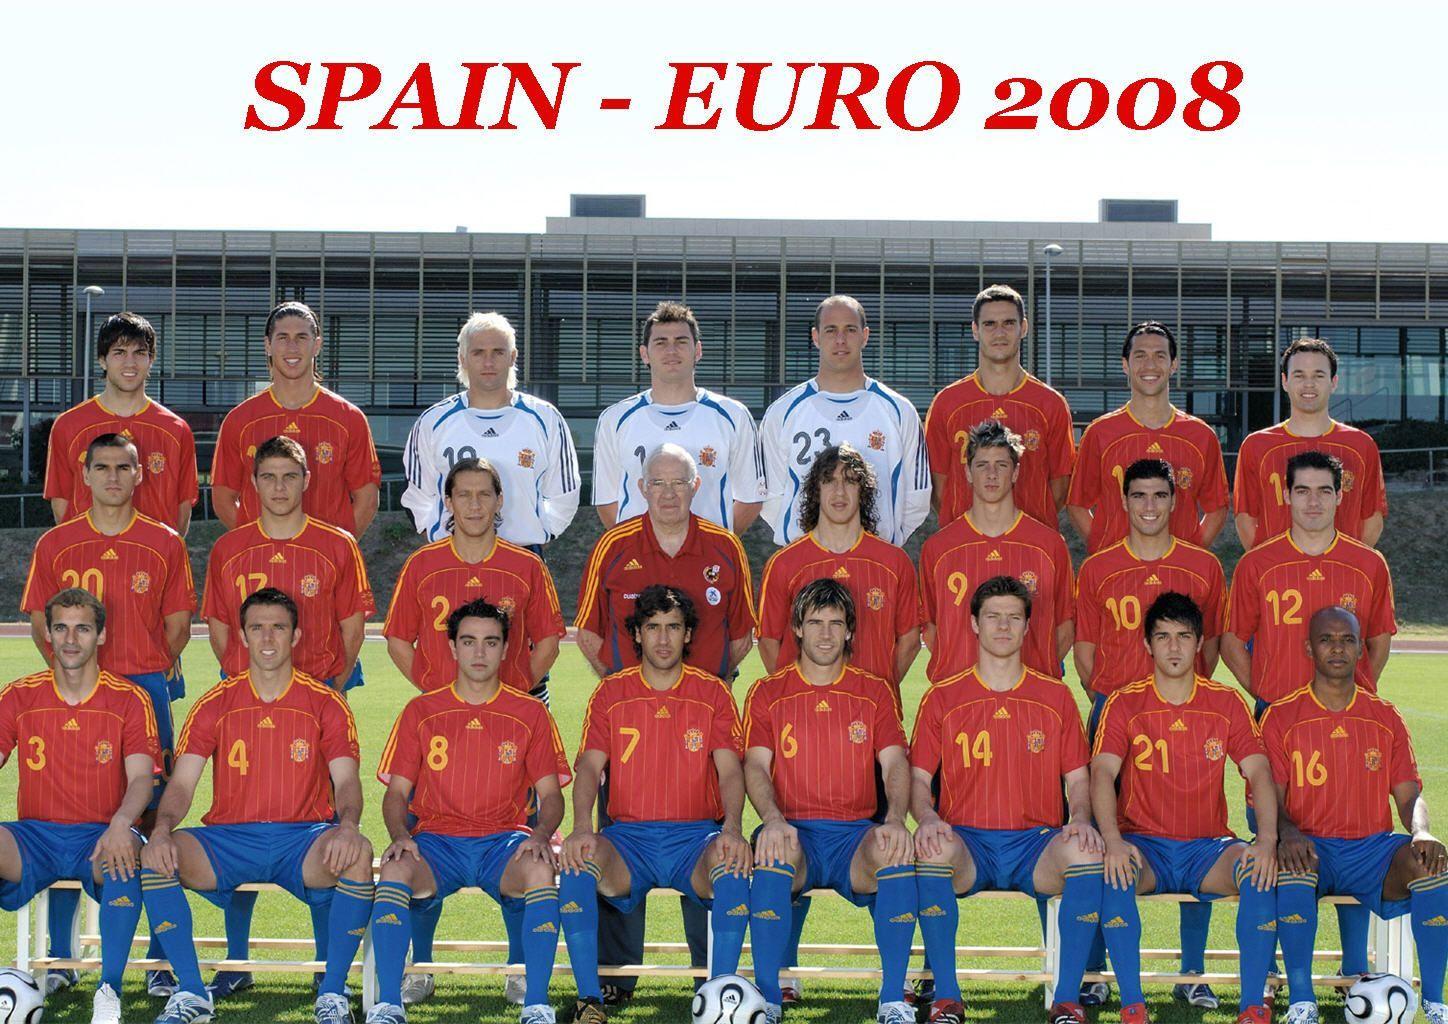 Spain Soccer Team wallpaper, Football Picture and Photo